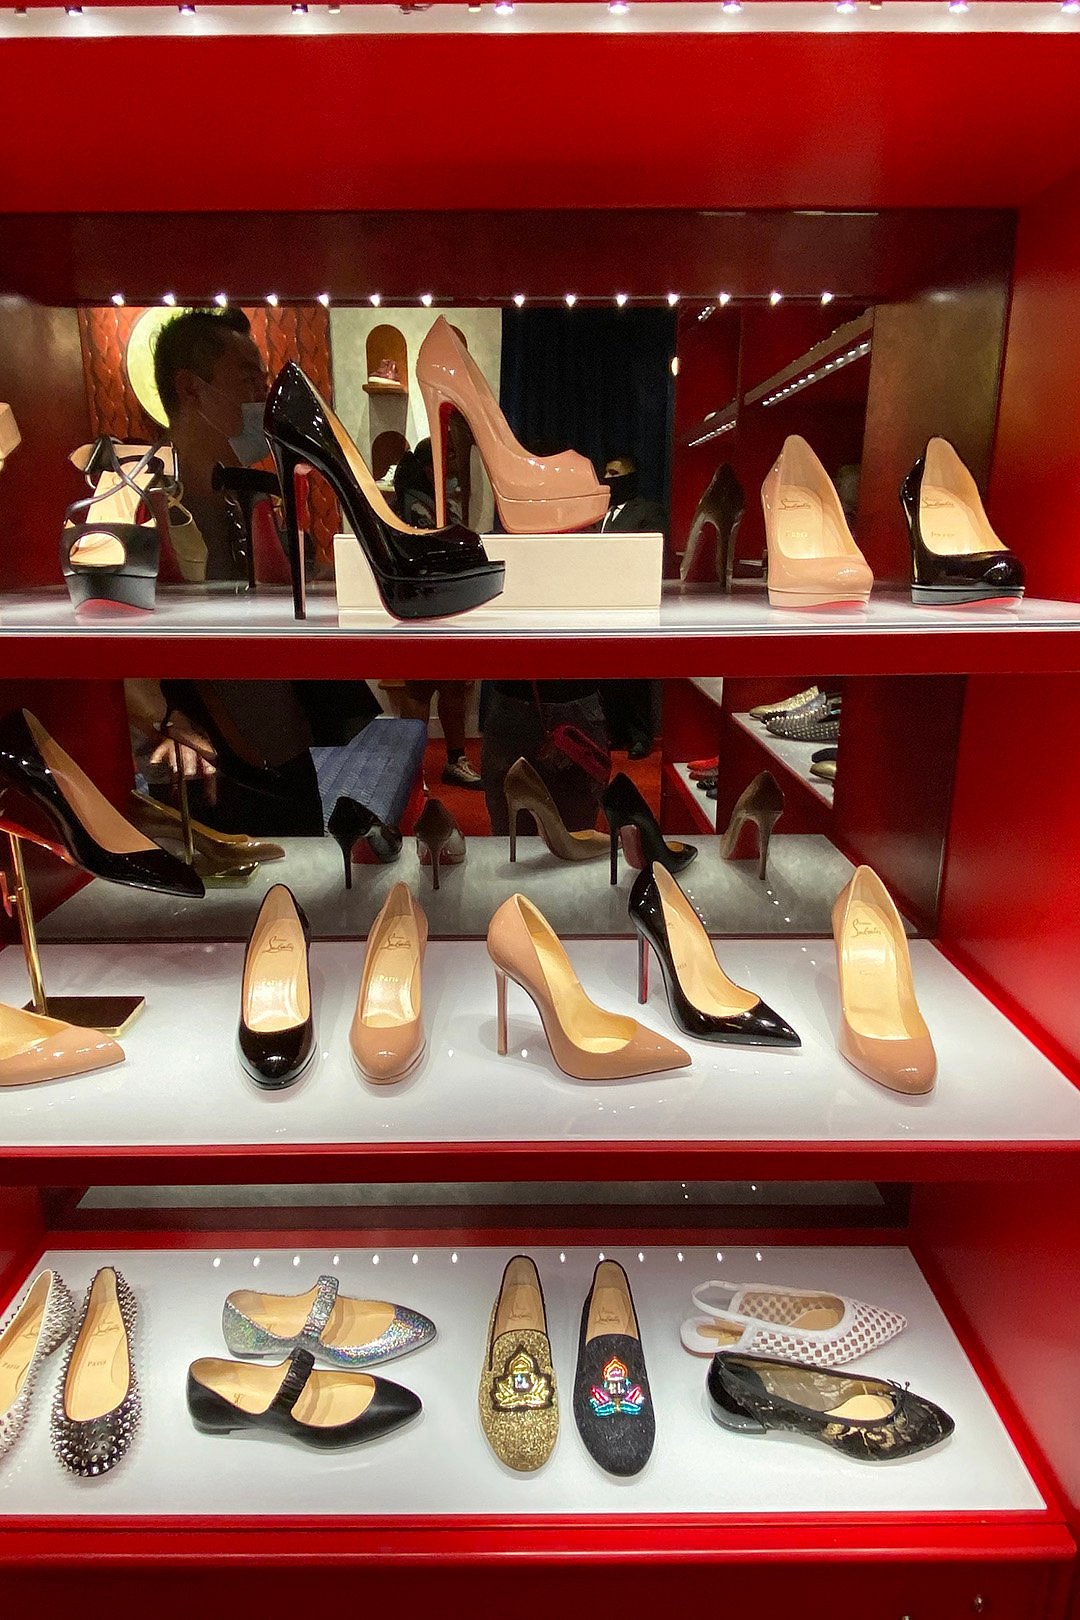 Choose a Pair of Shoes in a Private Christian Louboutin Shopping